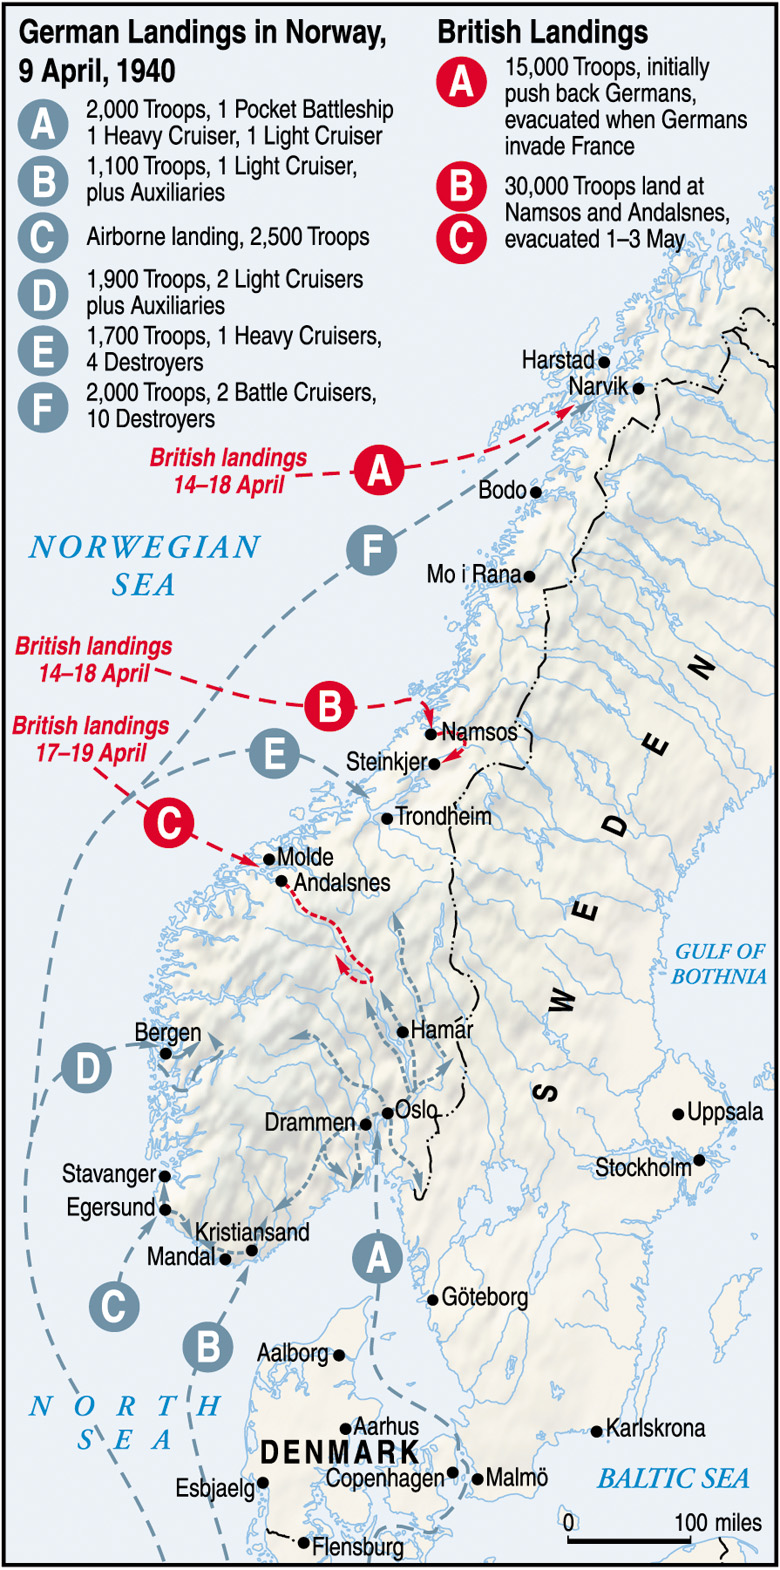 A series of German and British amphibious operations in Norway were followed by sharp clashes on land and sea. Both sides suffered serious losses before the Allied decision to withdraw was made.